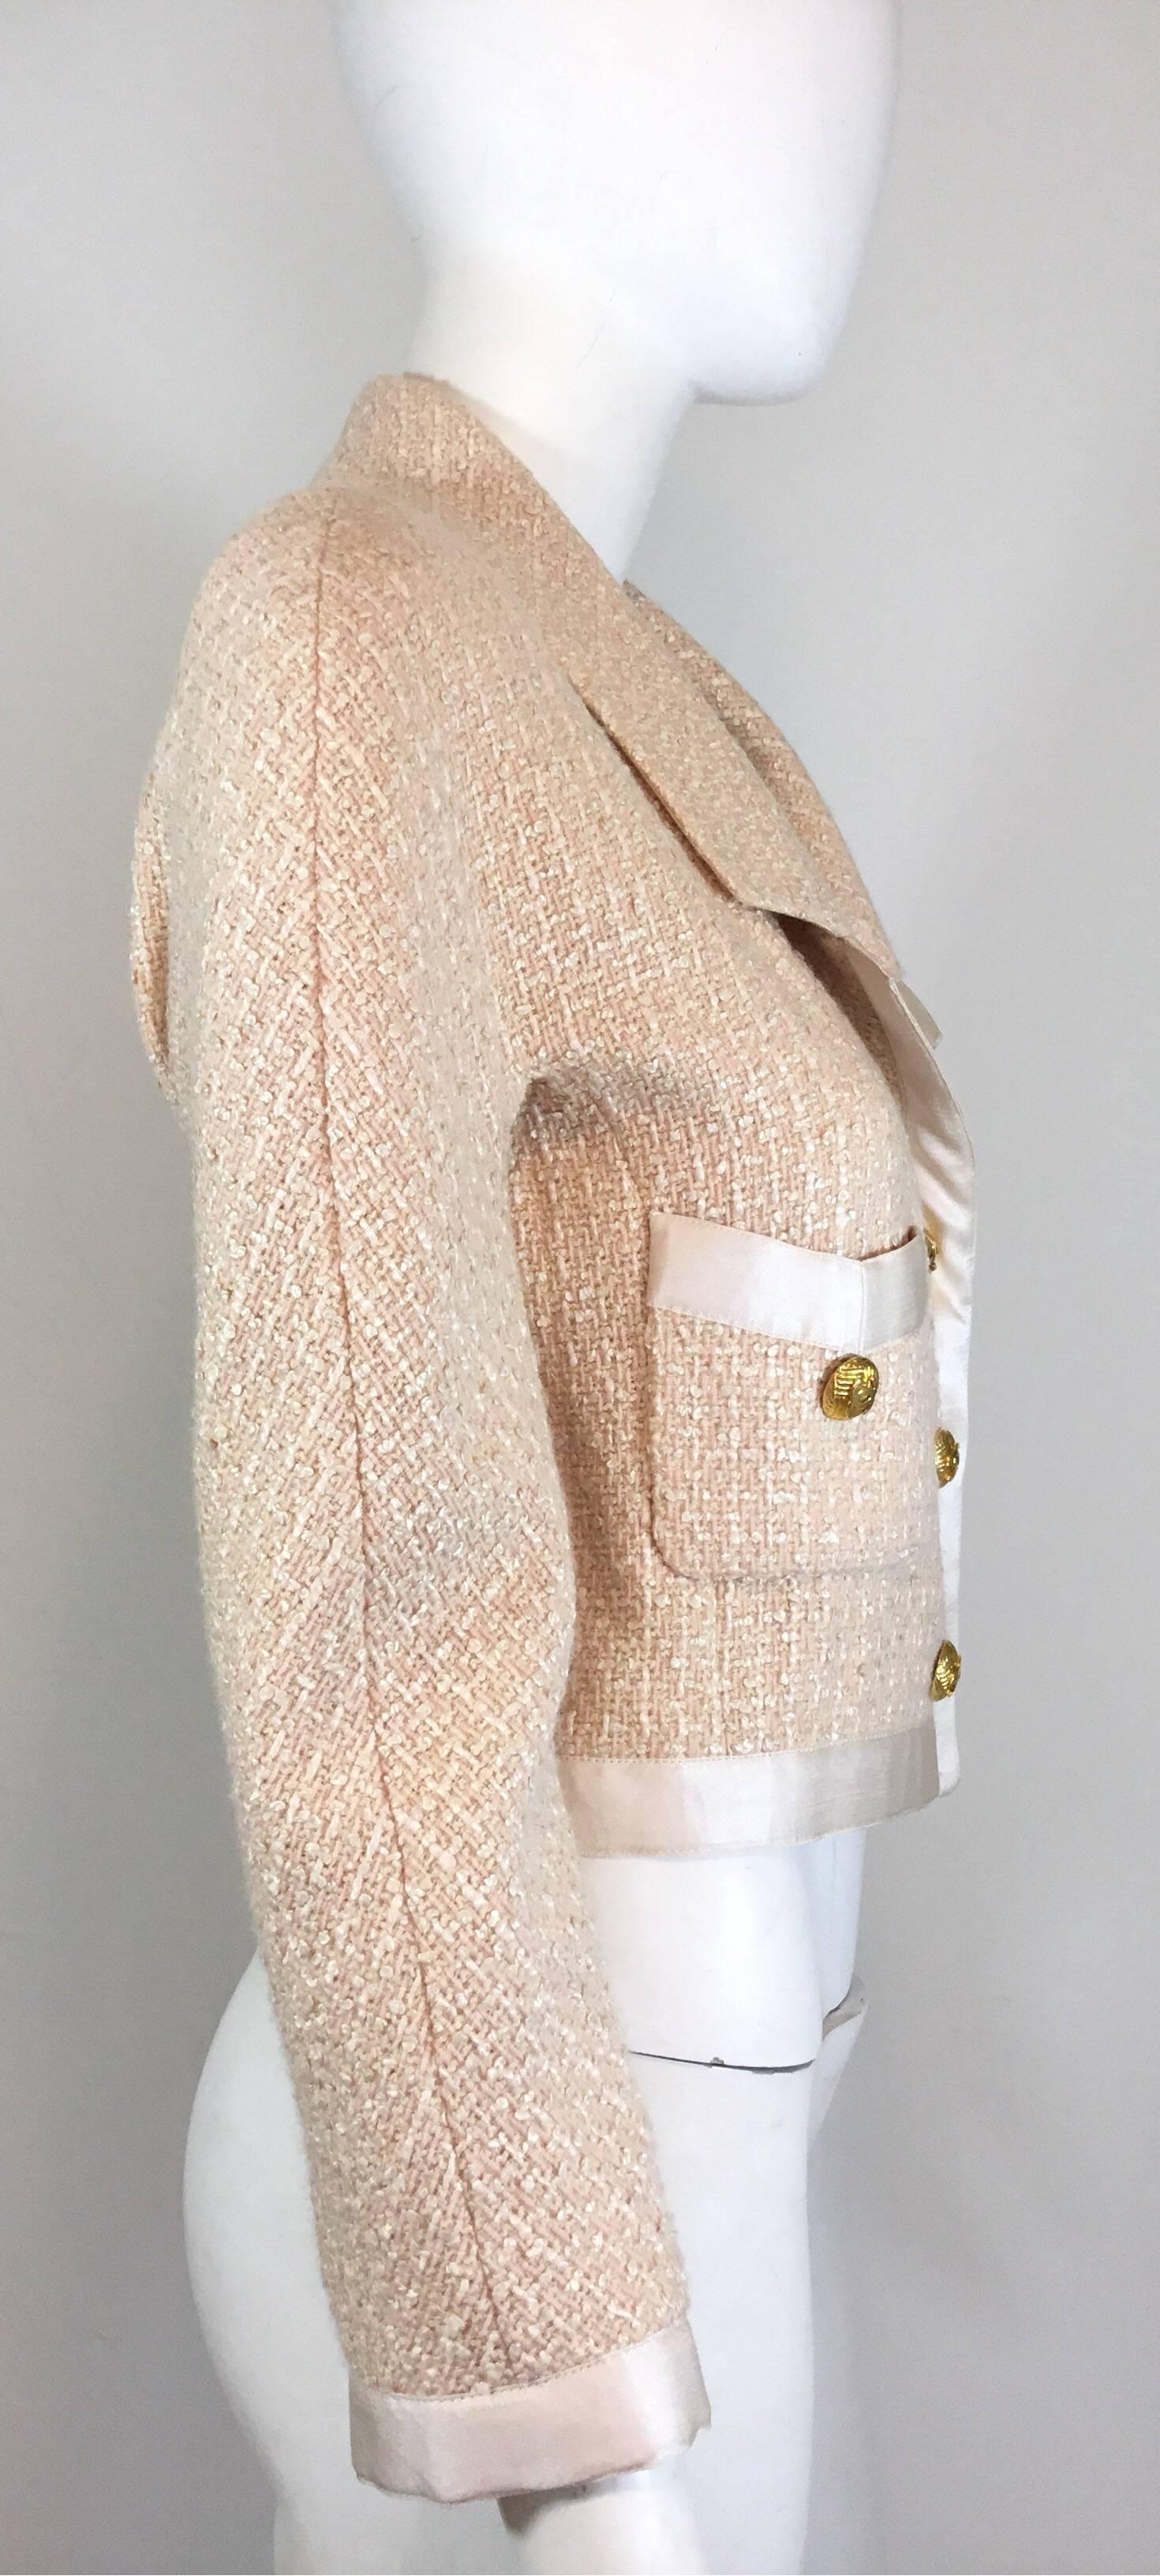 Chanel vintage jacket in light pink features satin trimming throughout with gold-tone button closures at the front, functional buttoned pockets at the bust, and a full silk lining. Jacket also has a chain trim along the hem.

bust 38'', length 20''